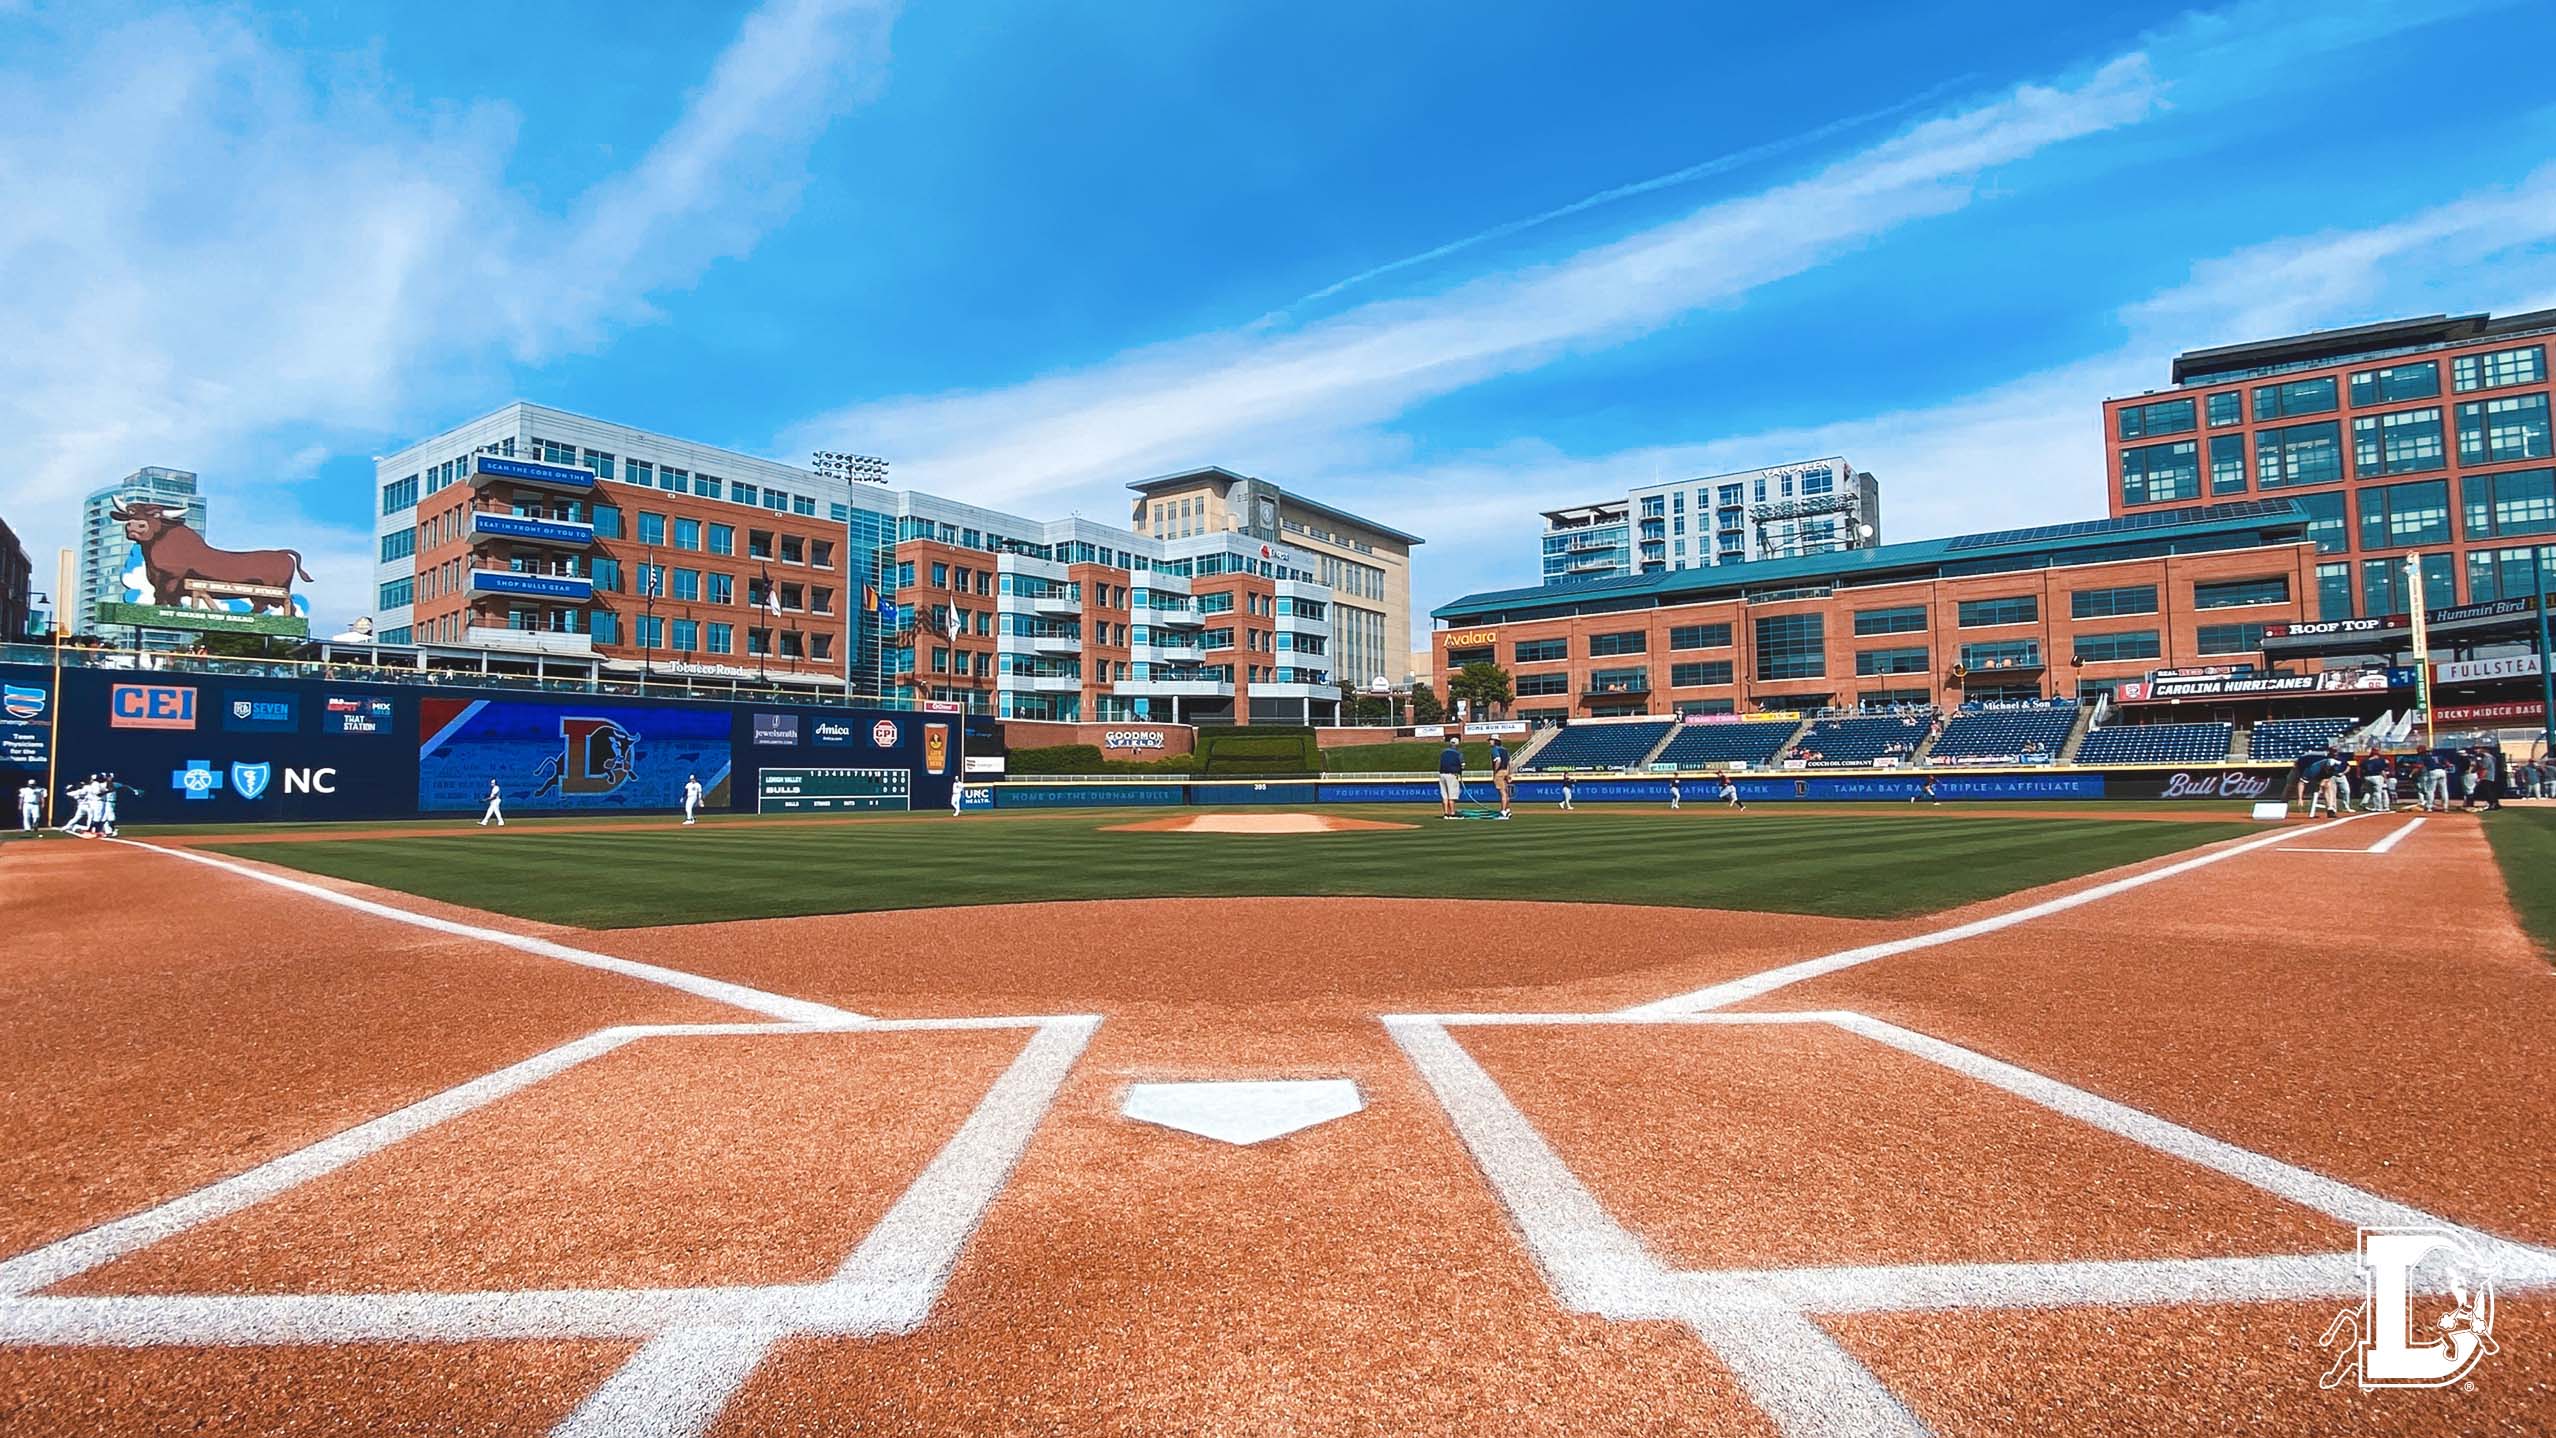 For one night, the Durham Bulls will transform into the Durham